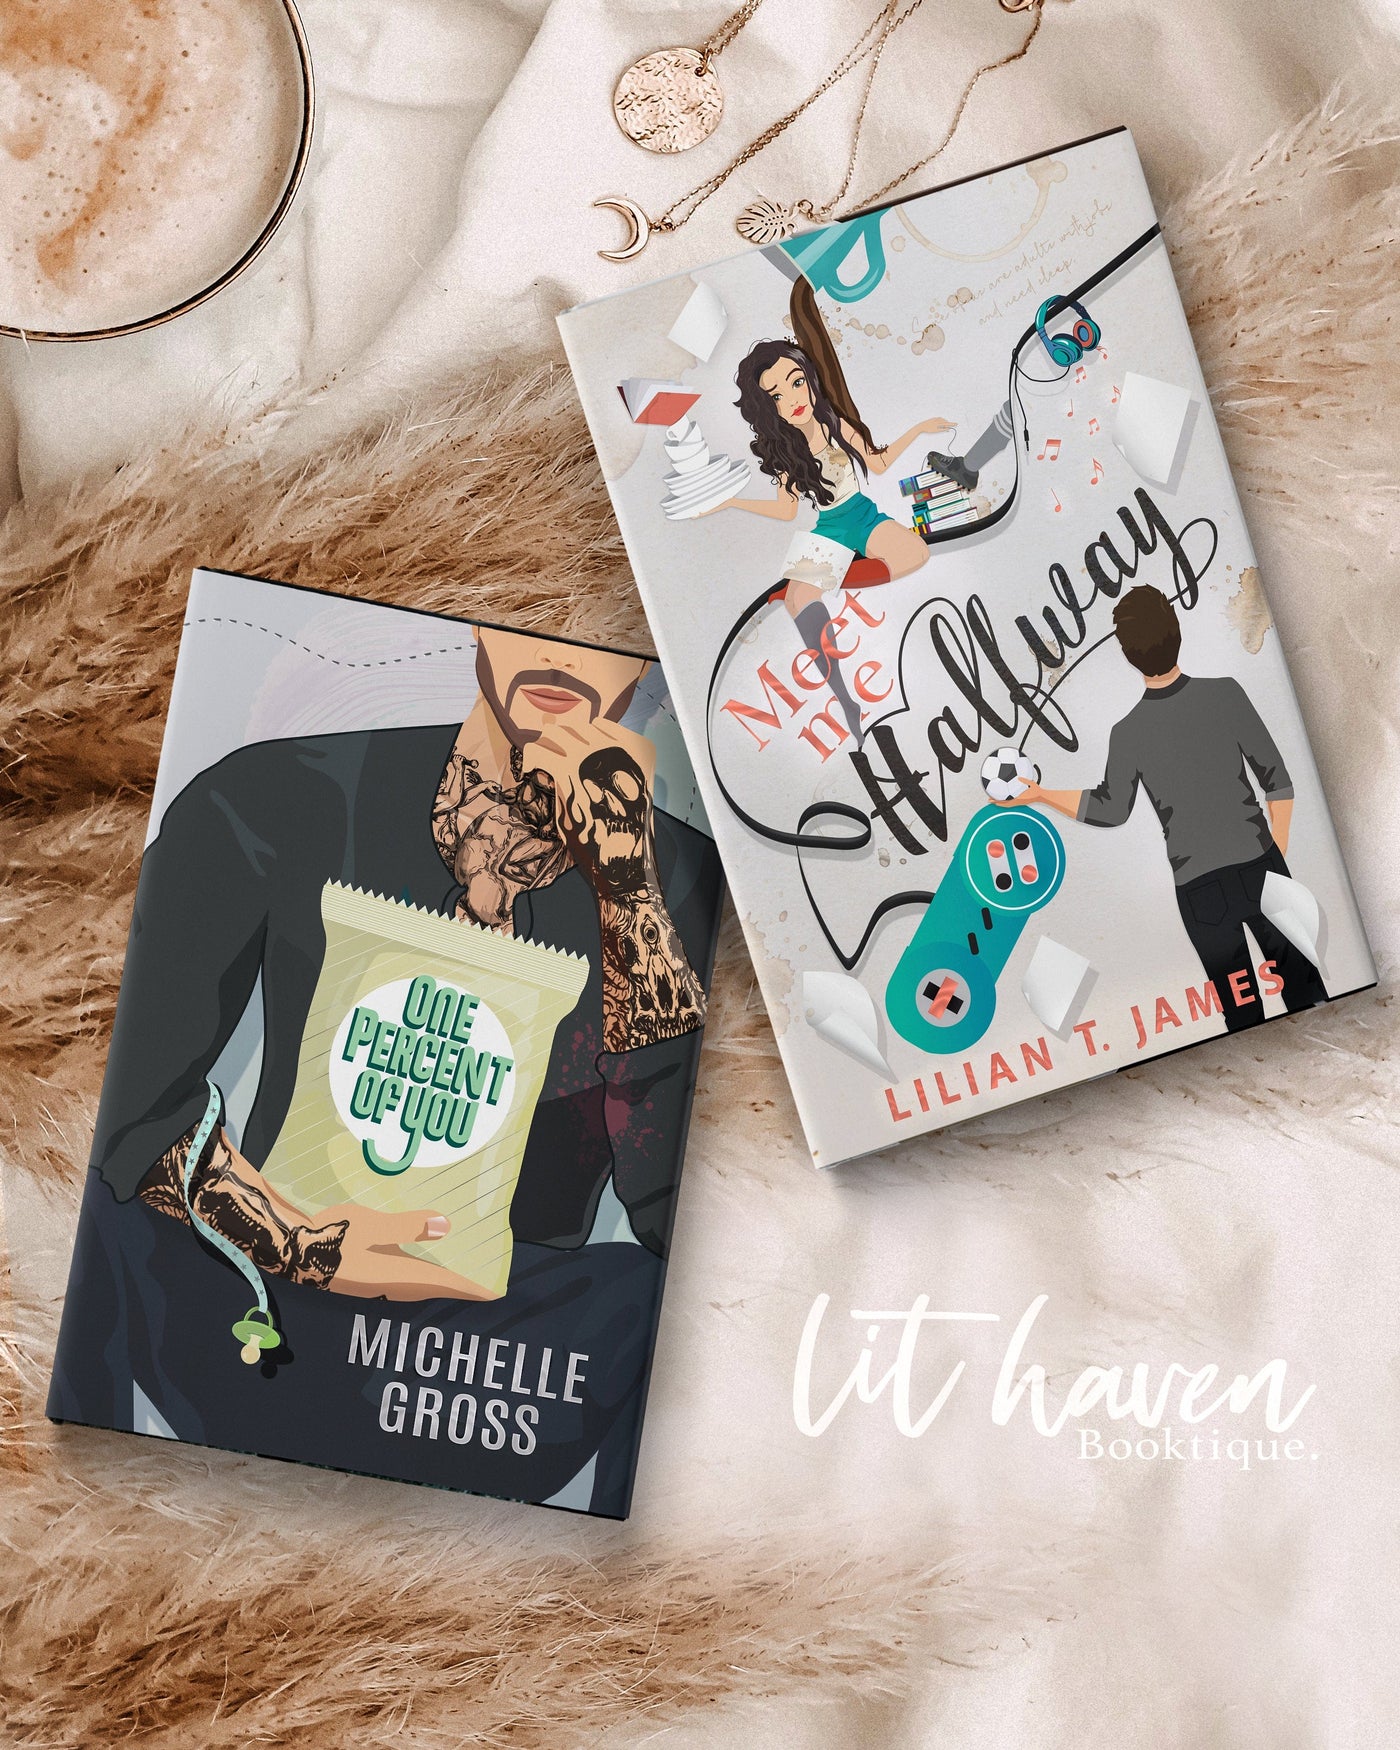 Lit Haven Booktique Book One Percent of You + Meet Me Halfway Bundle Upgrade / No Sprayed Edges Individual Waitlist | One Percent of You Signature Edition